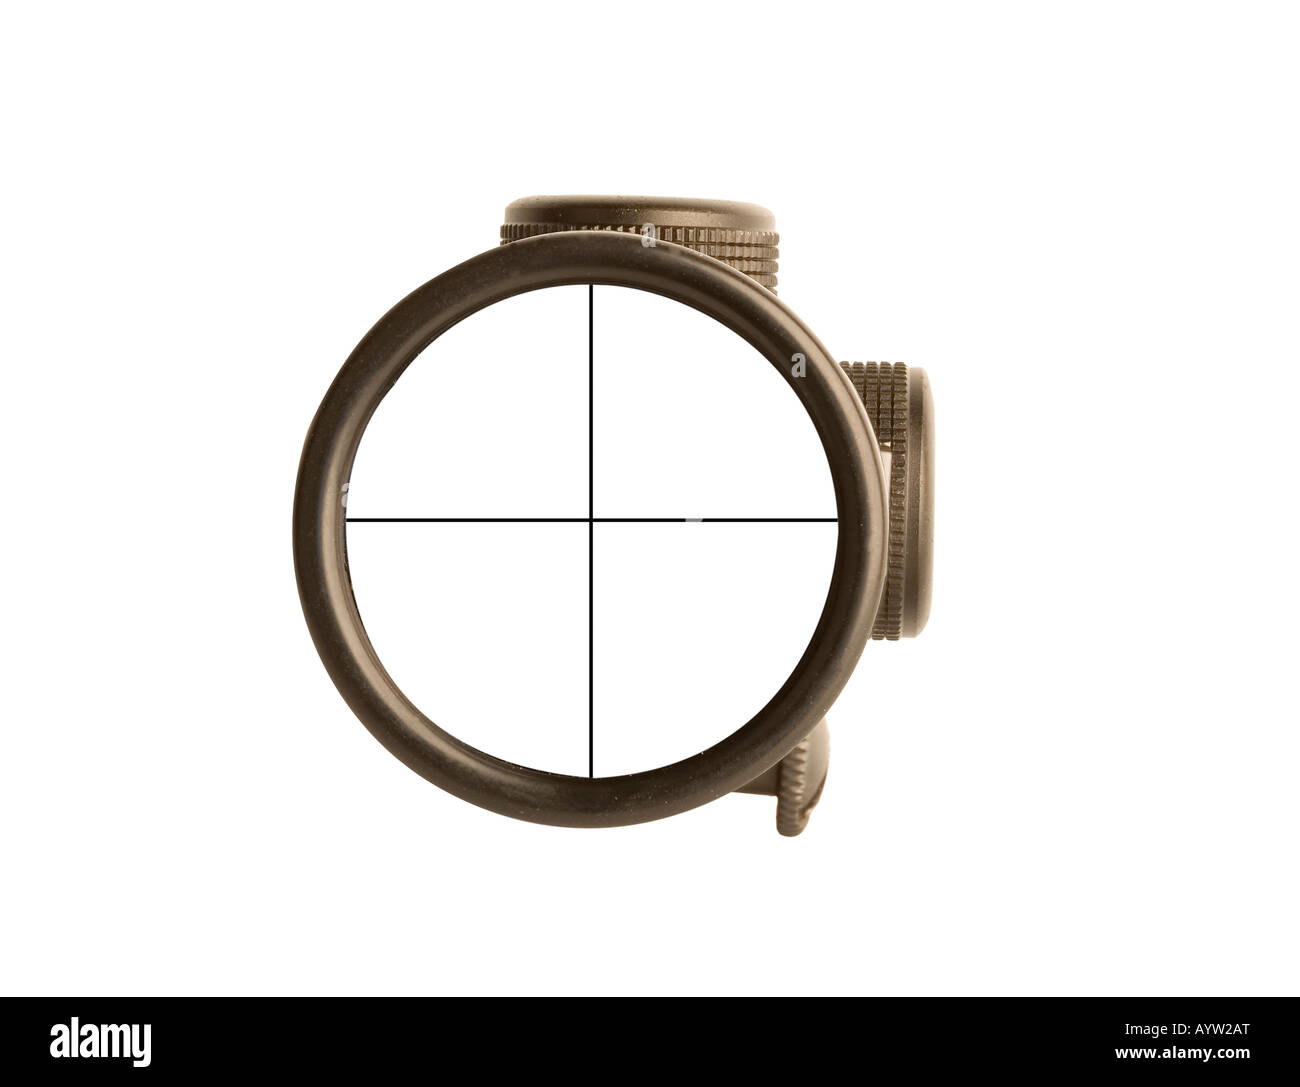 Image of a rifle scope sight used for aiming with a weapon Stock Photo